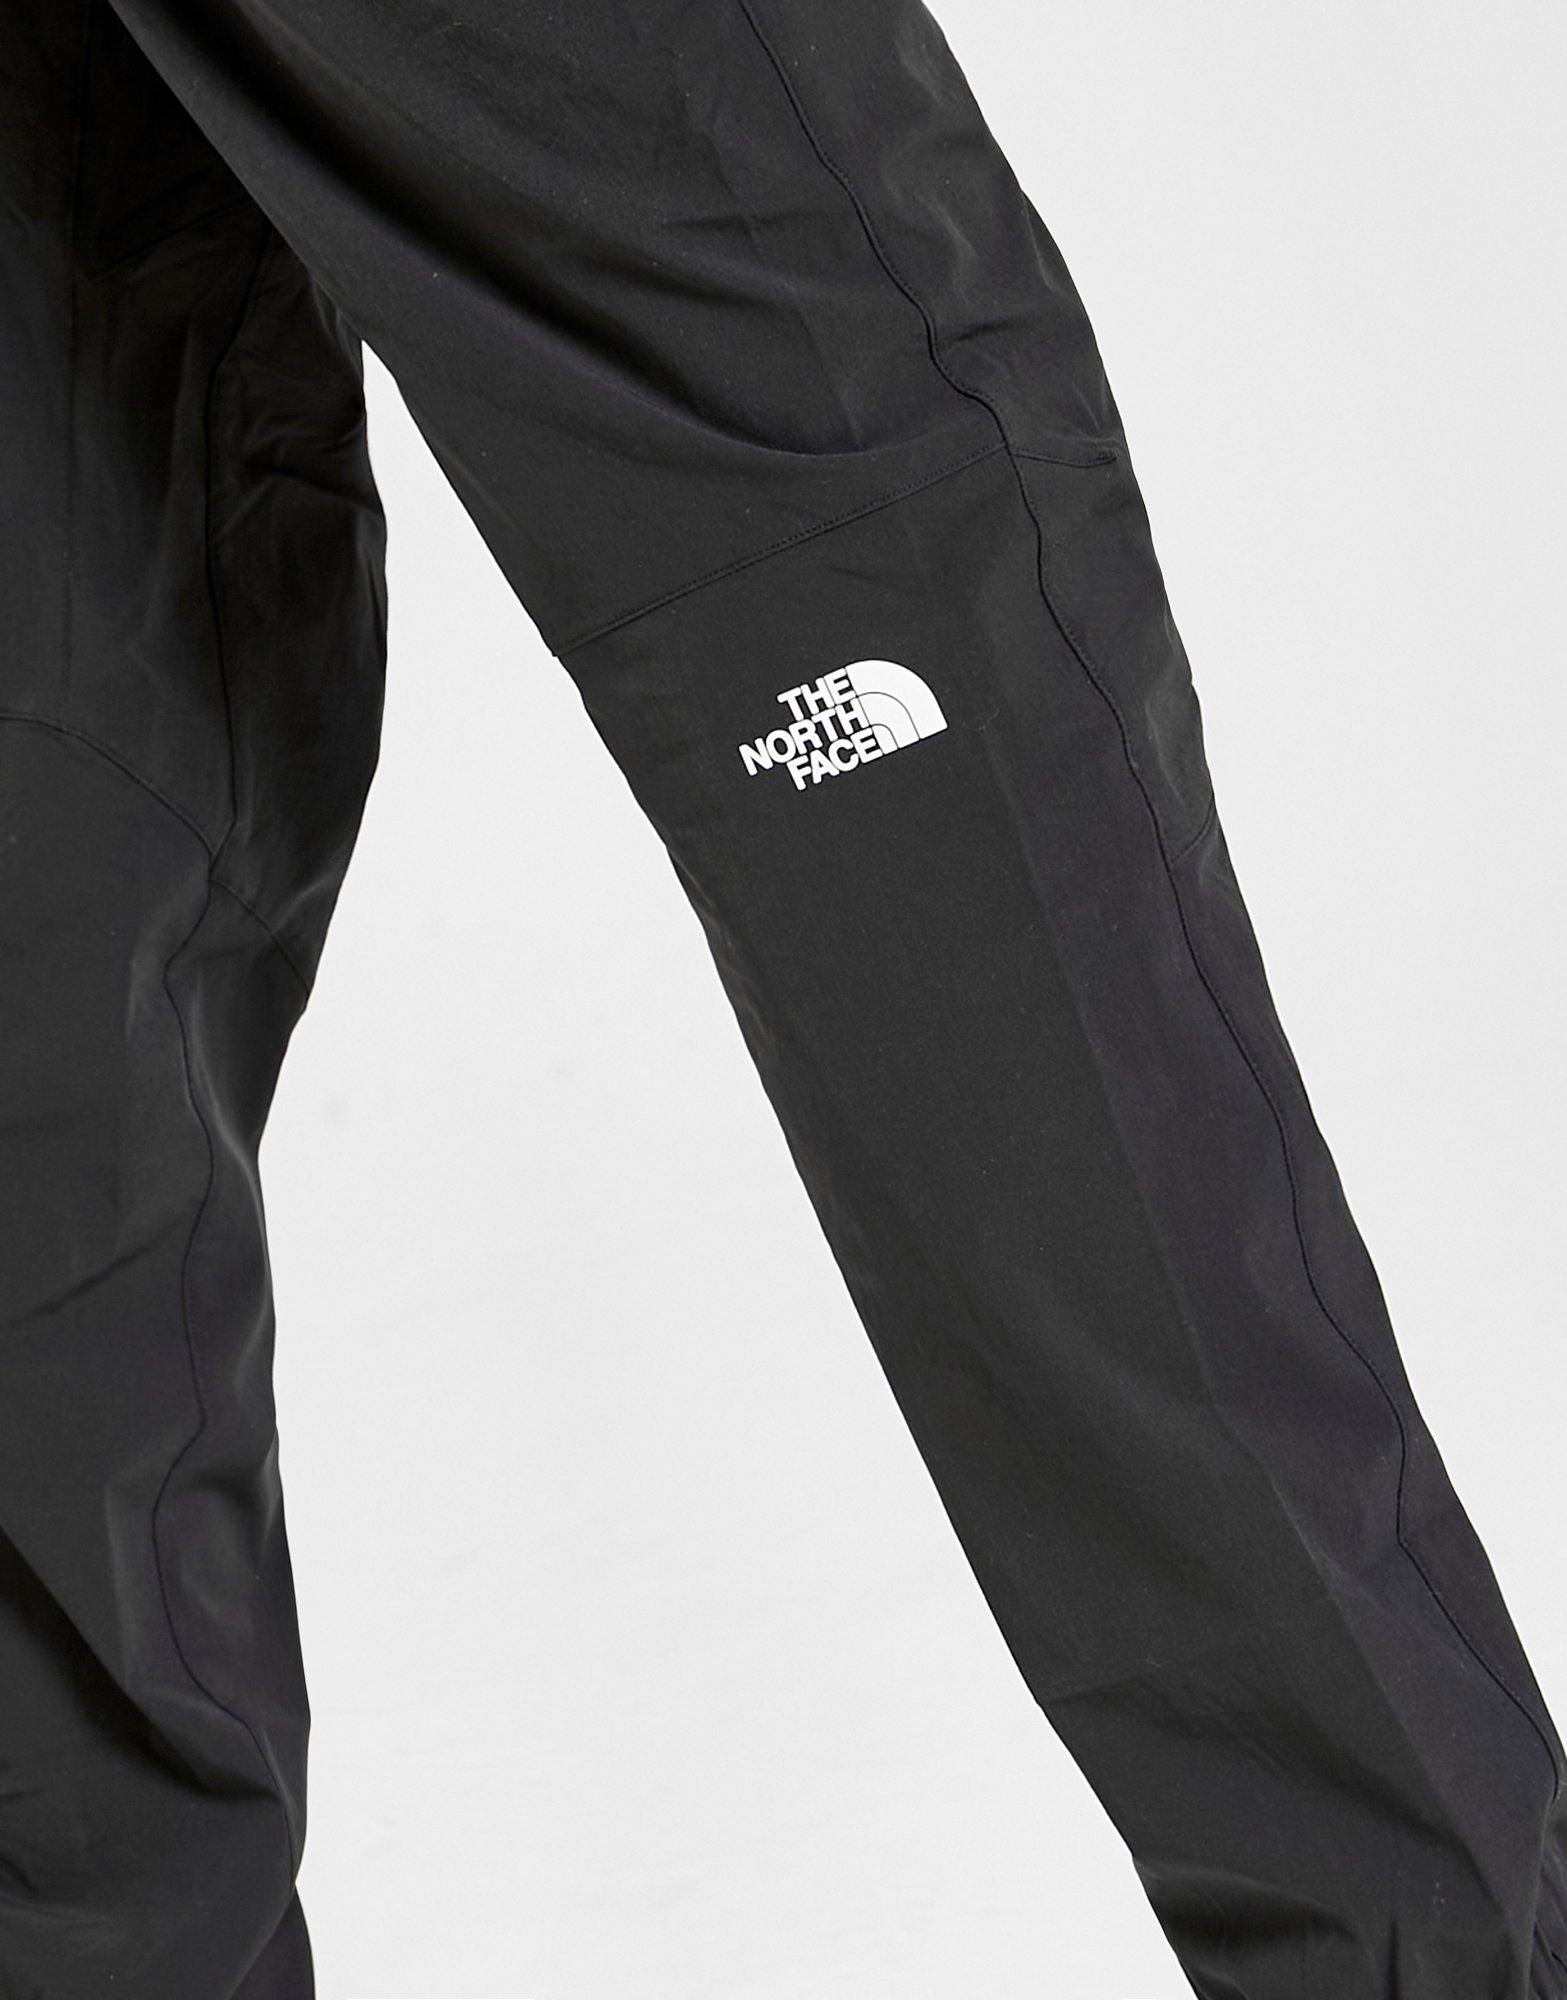 north face track pant